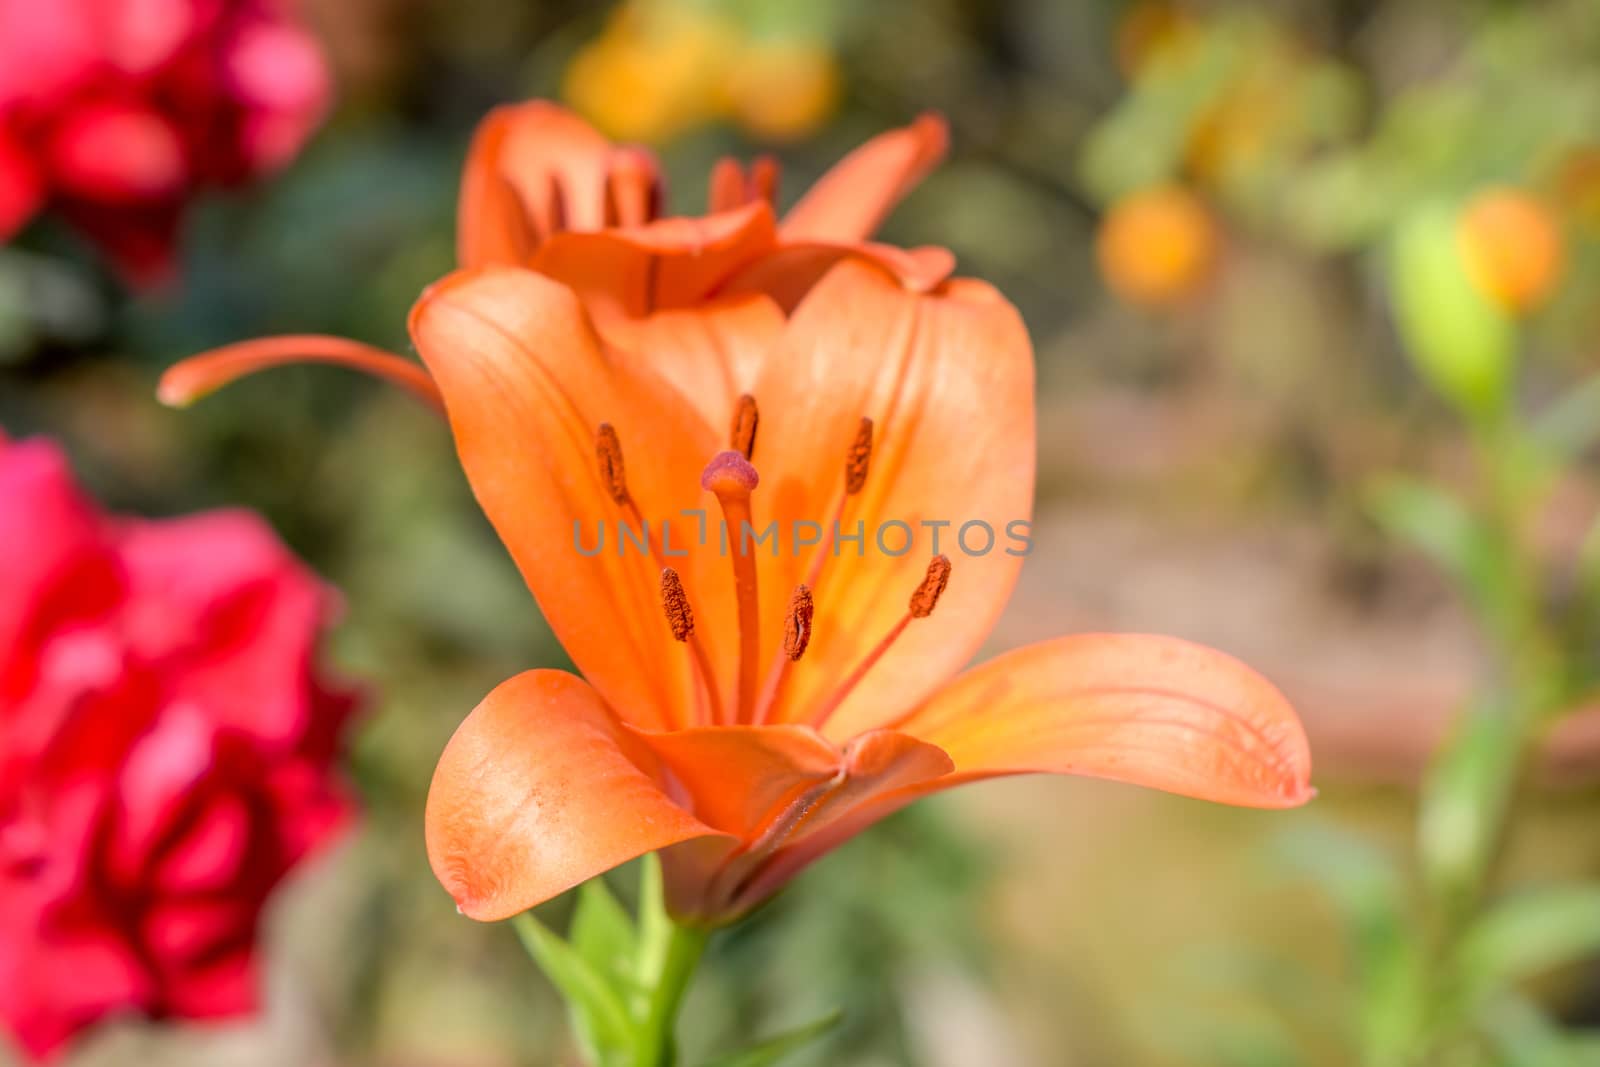 One Trumpet vine or trumpet creeper (Campsis radicans) flower, known as cow itch or hummingbird vine, in bloom with seeds and leaves, growing outdoors in summer. Popular woodland in China and America by sudiptabhowmick